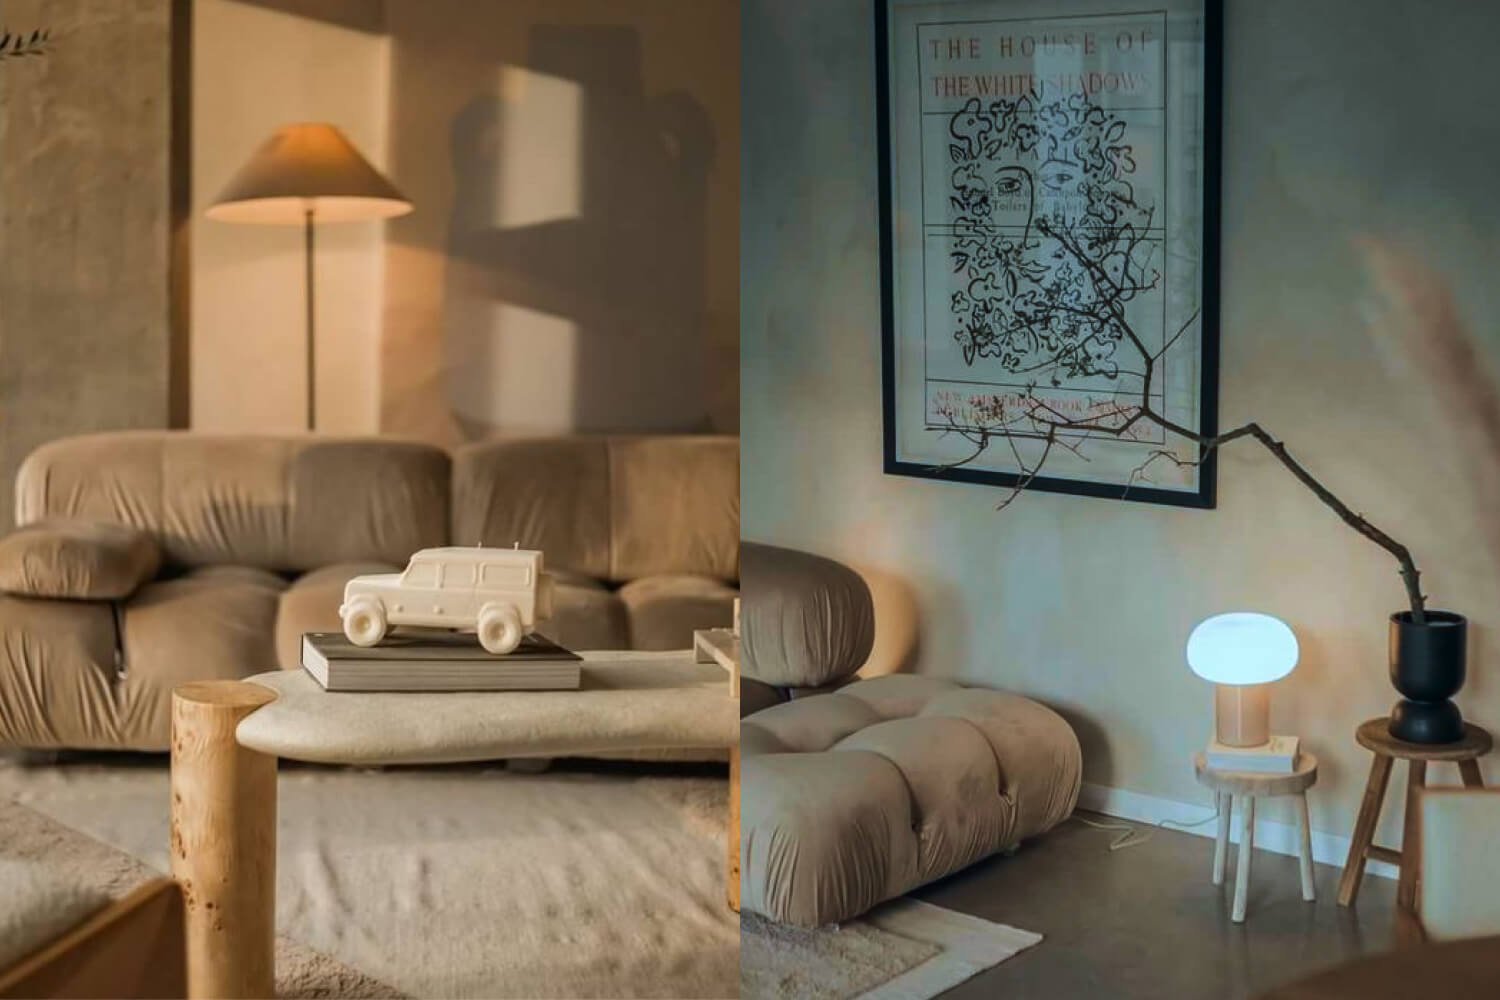 Comparison between warm and cool lighting in a room.